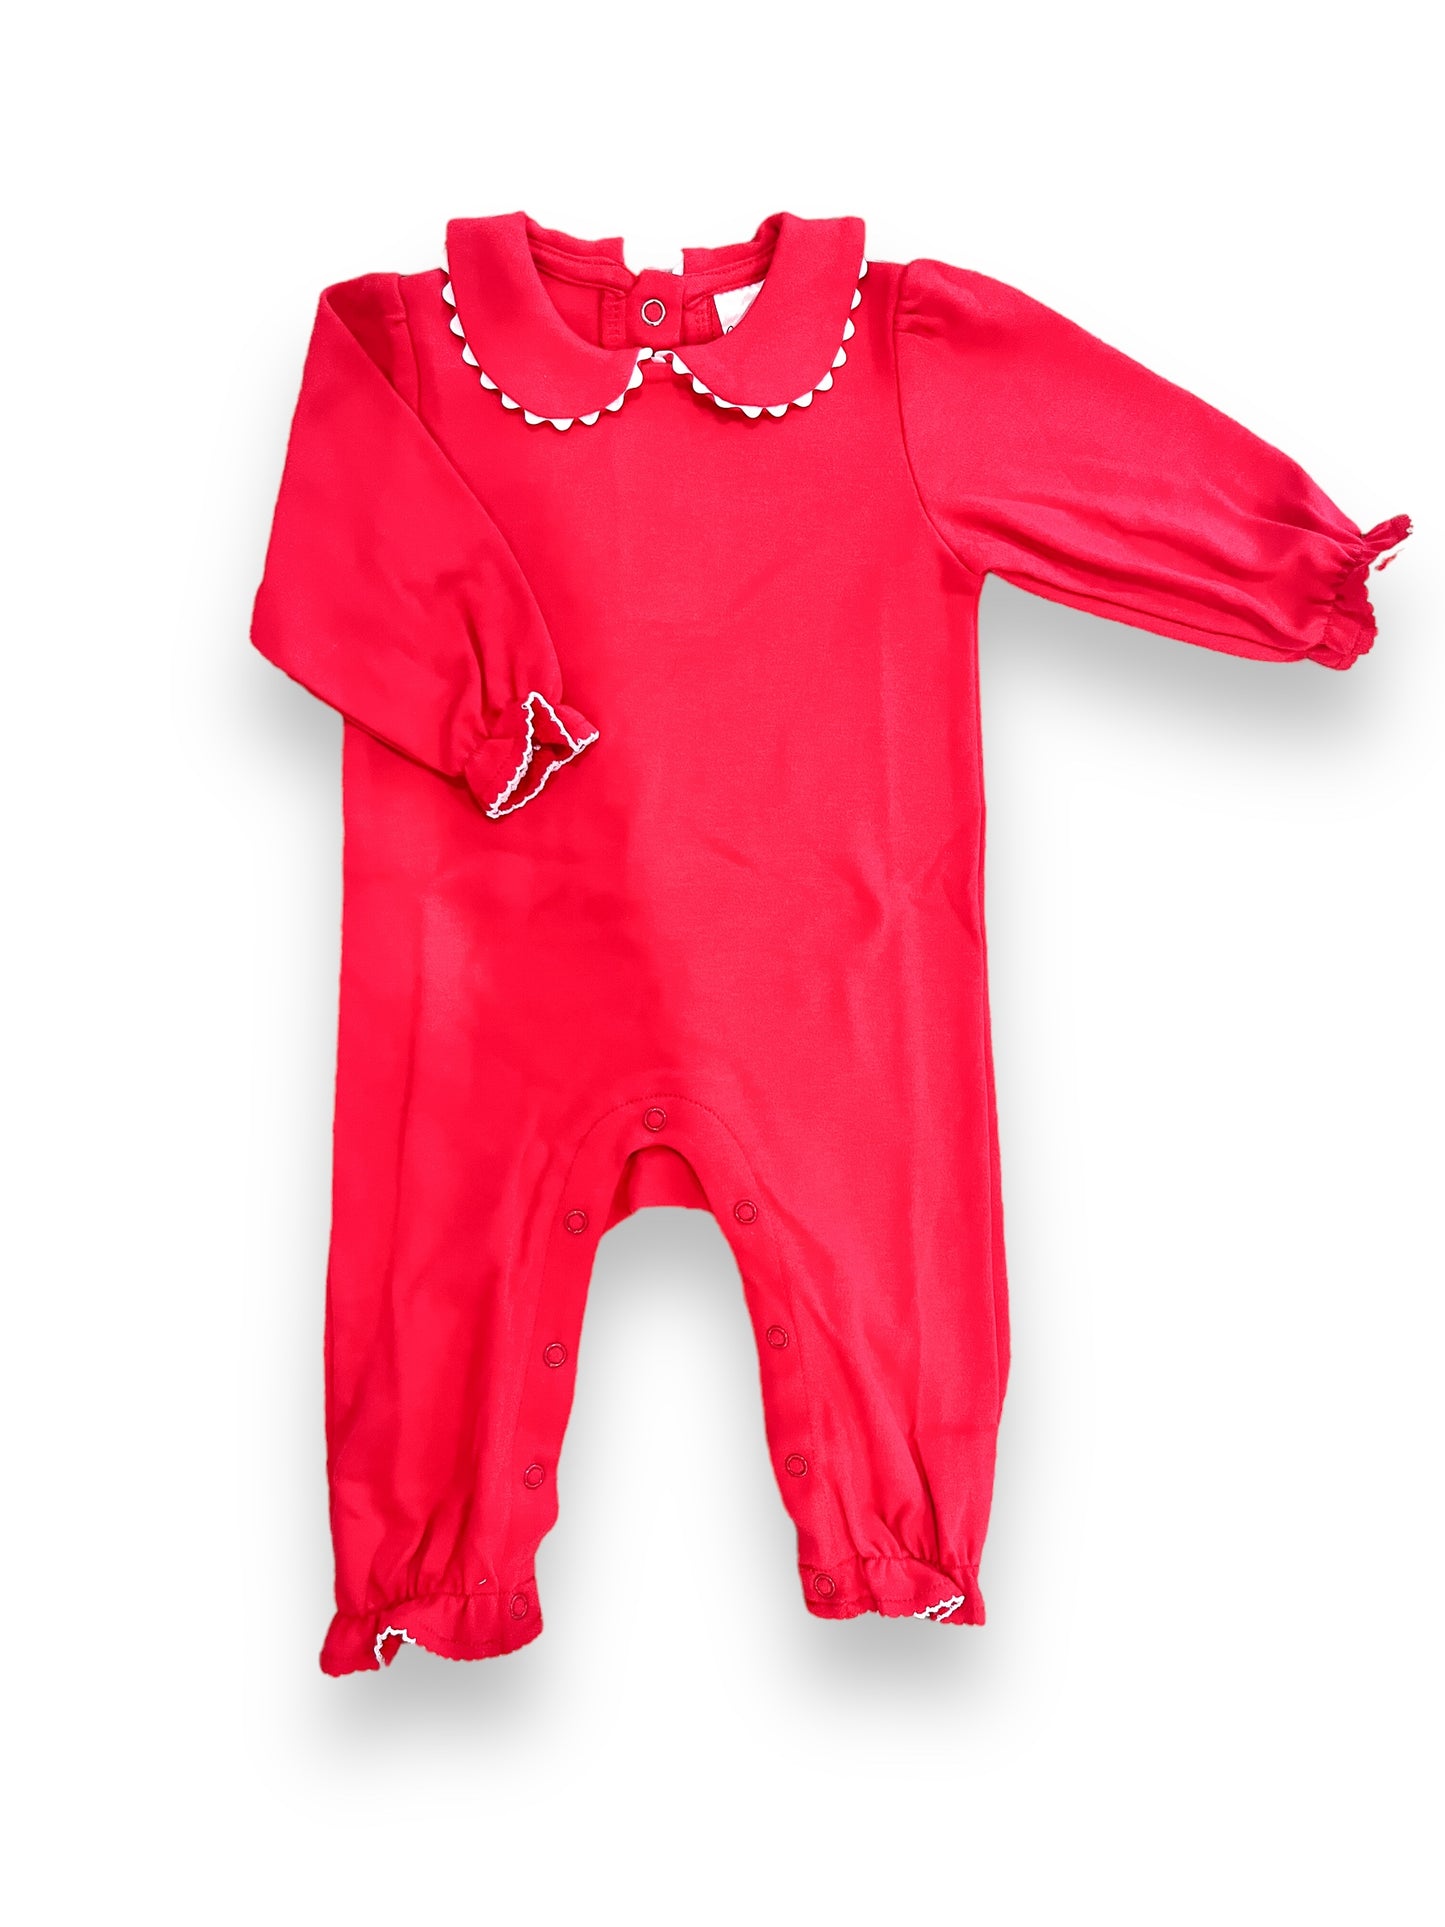 Scalloped Collared Rompers